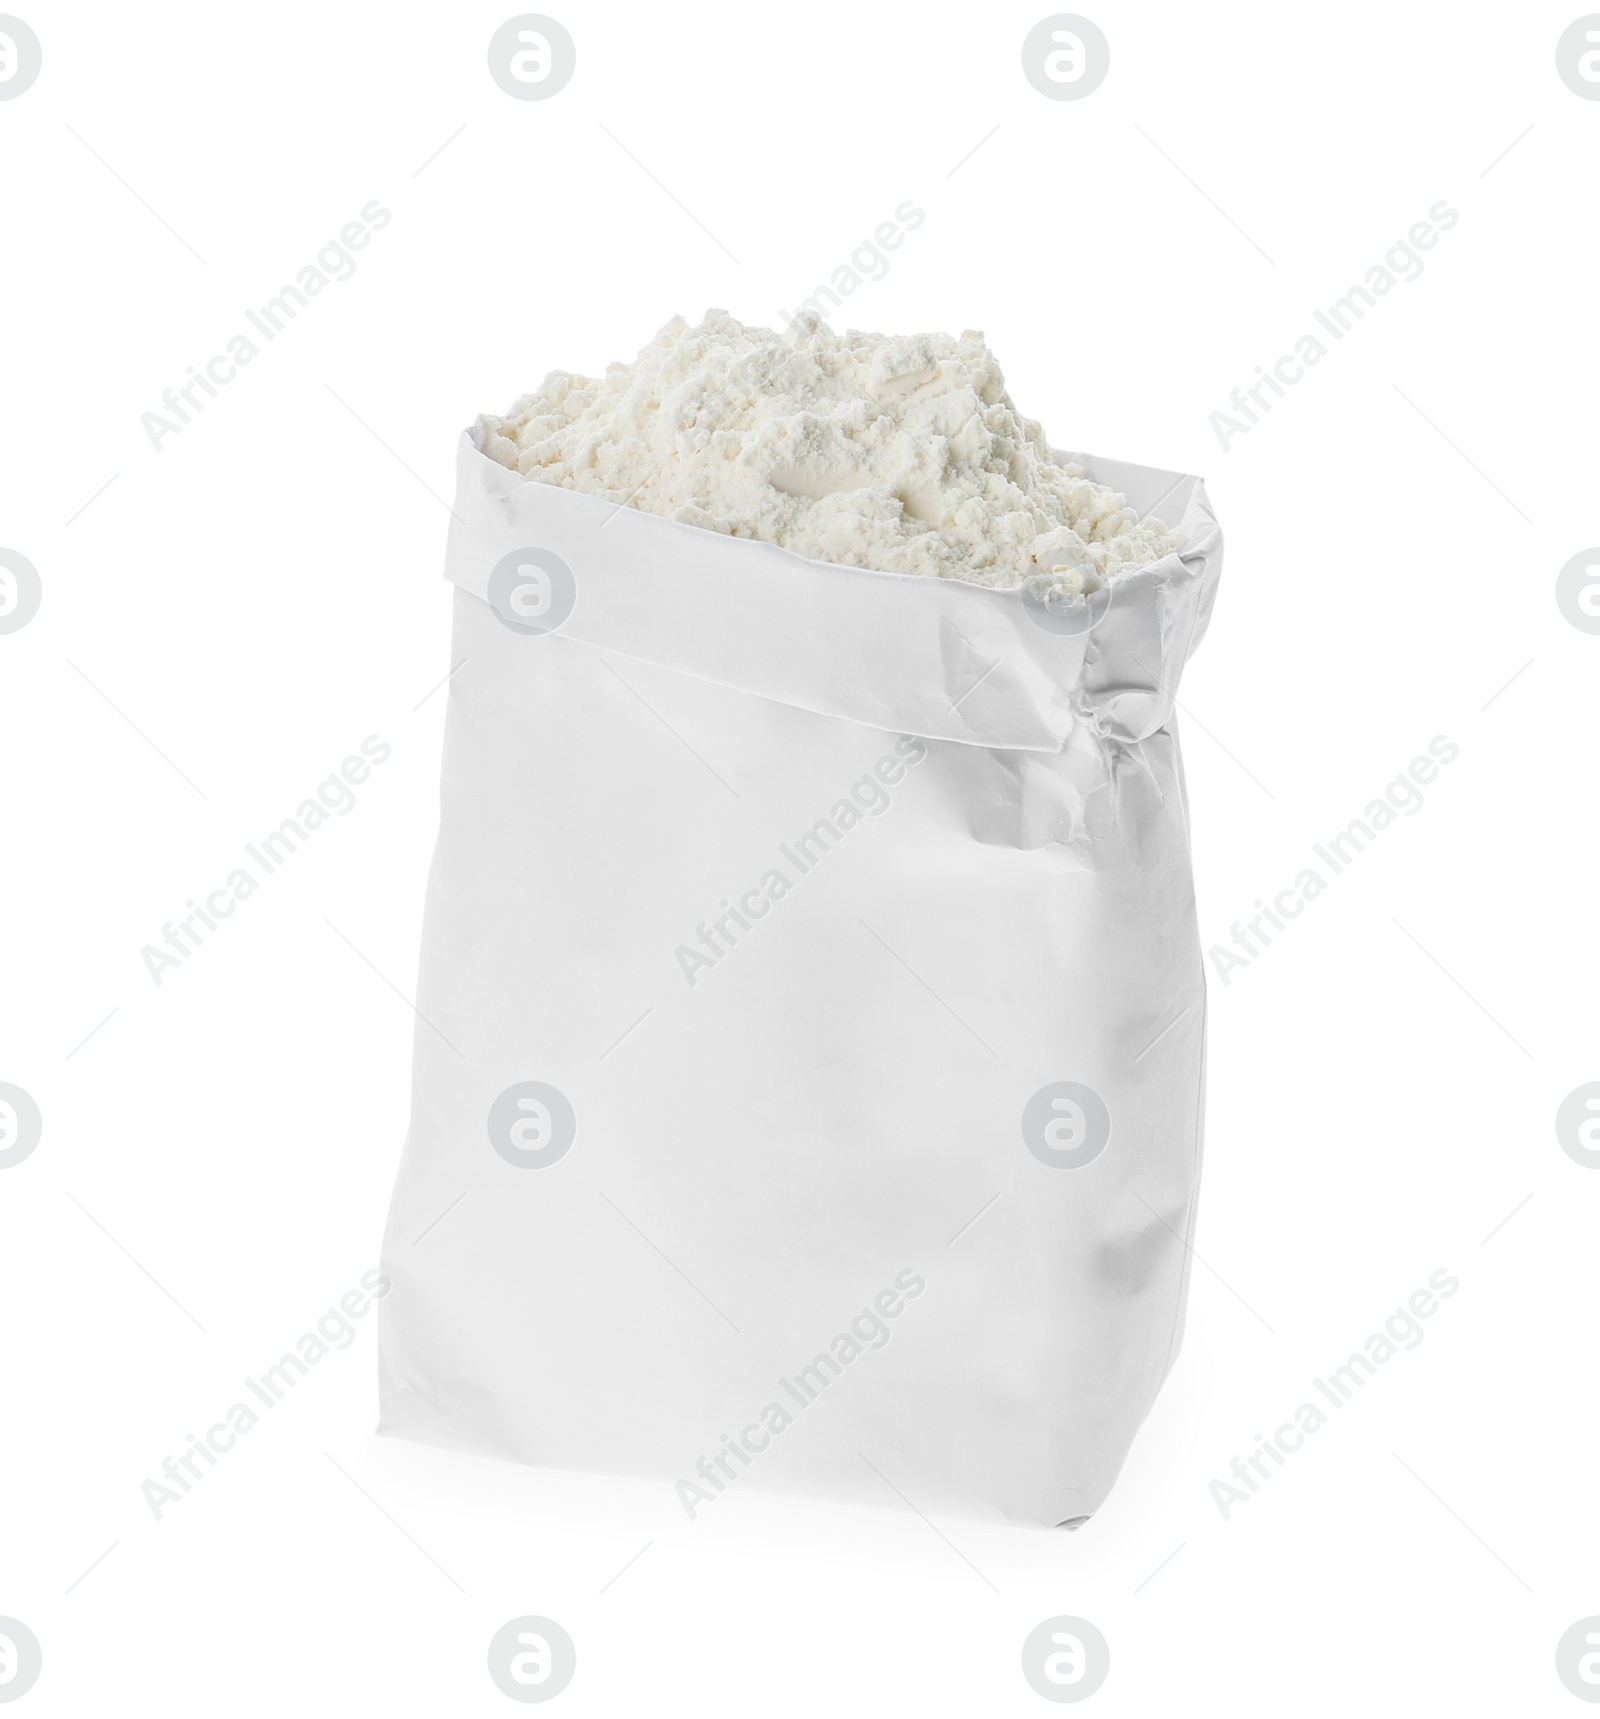 Photo of Organic flour in paper bag isolated on white